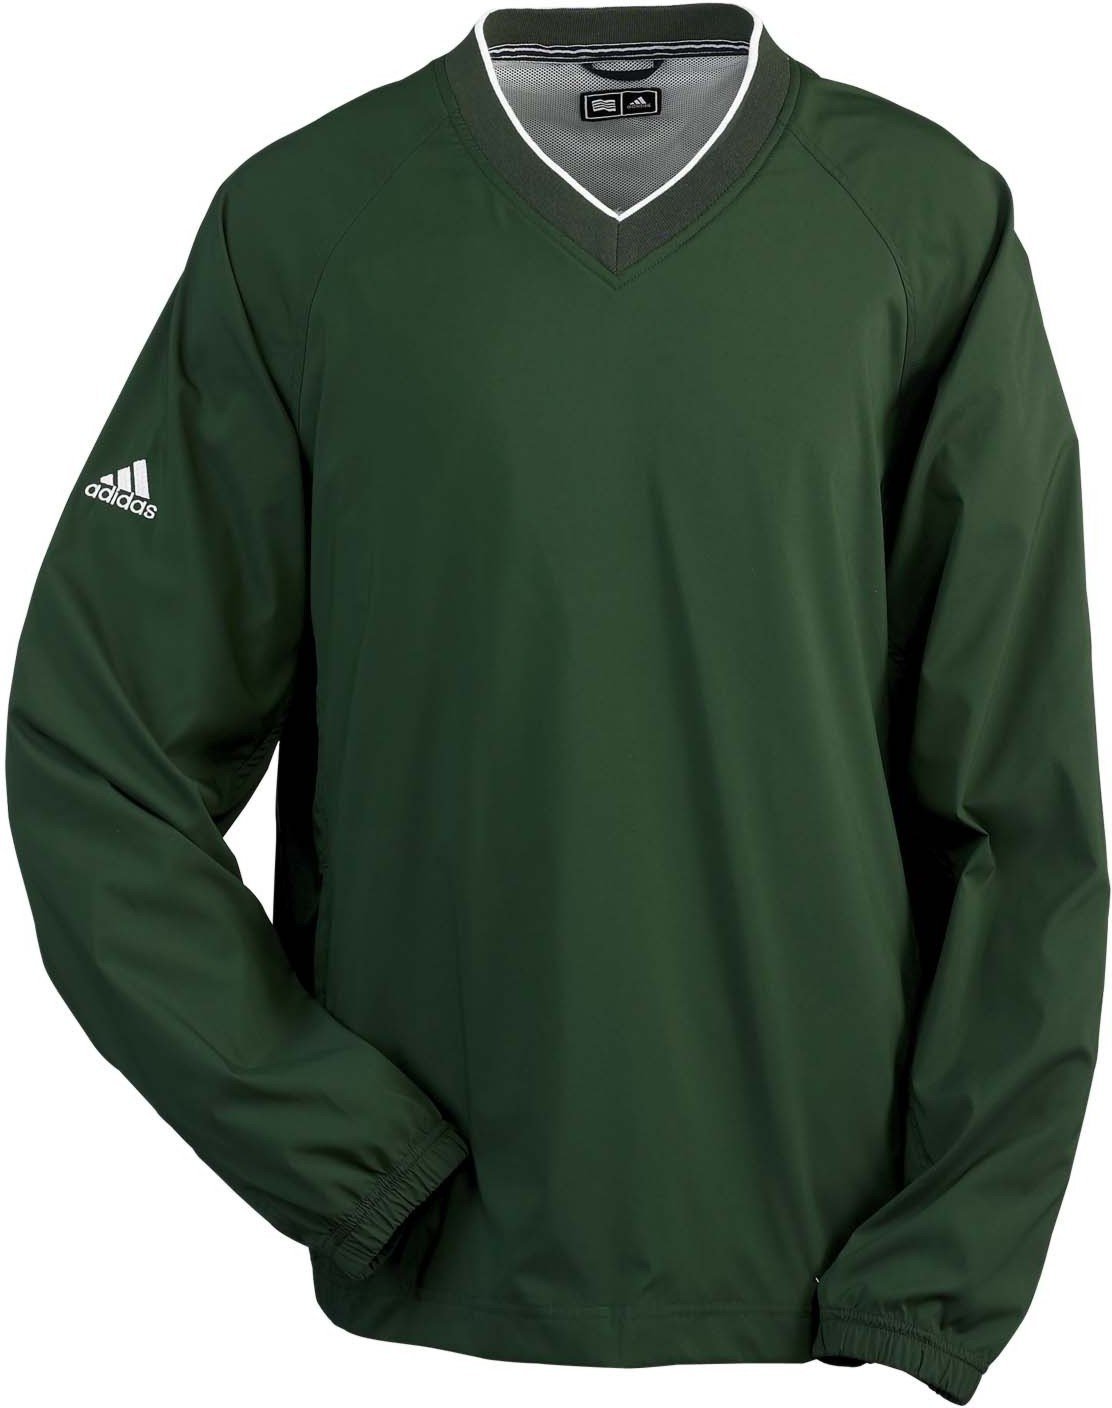 Mens Adidas A47 Climaproof V-Neck Golf Wind Pullovers